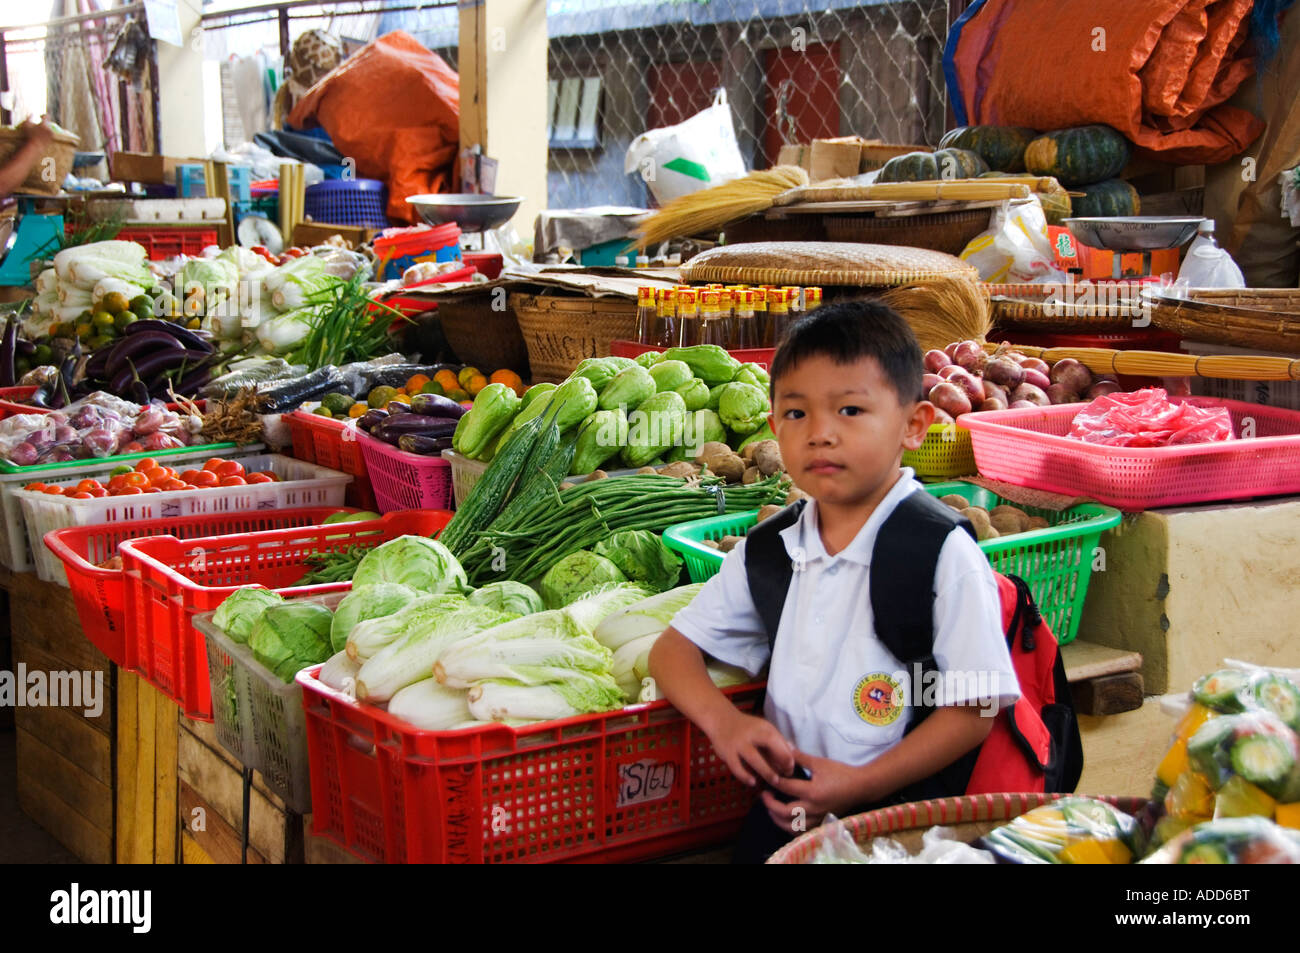 Philippines Luzon Island The Cordillera Mountains Mountain Province Bontoc Food Market and Young Boy near Stand Stock Photo